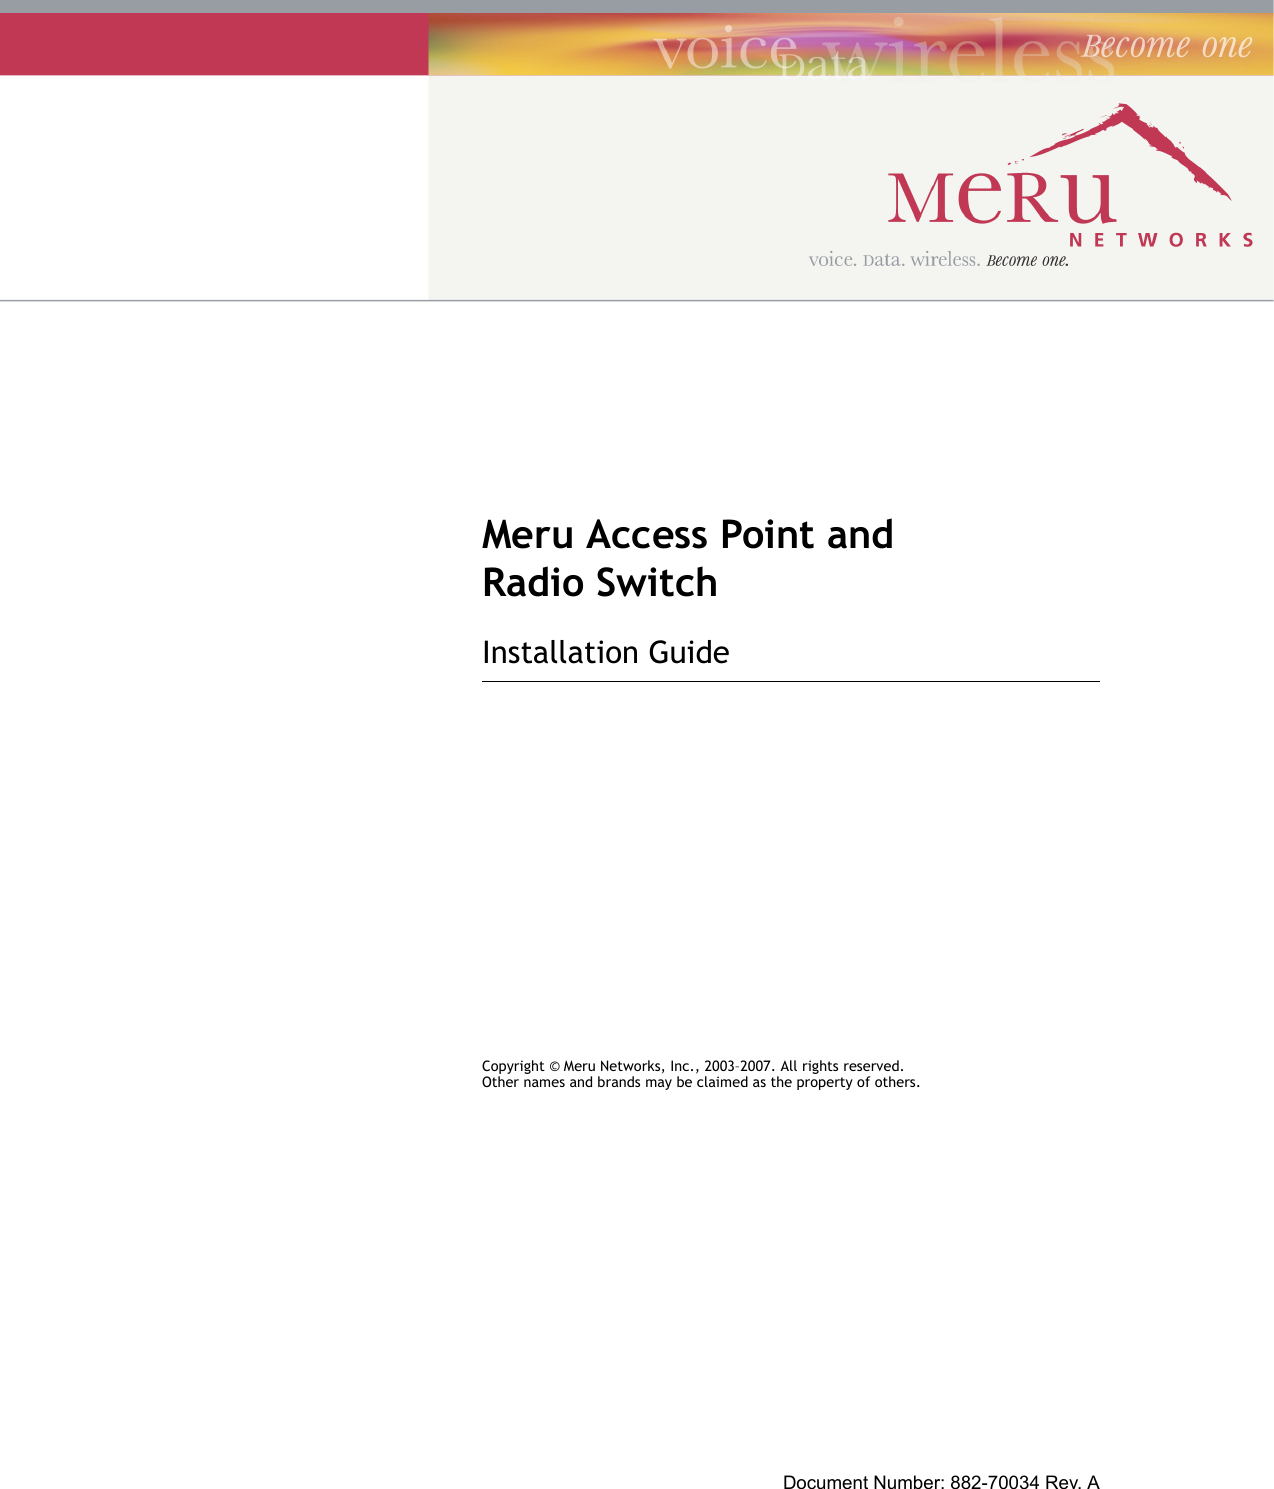 Meru Access Point and Radio SwitchInstallation GuideCopyright © Meru Networks, Inc., 2003–2007. All rights reserved.Other names and brands may be claimed as the property of others.Document Number: 882-70034 Rev. A